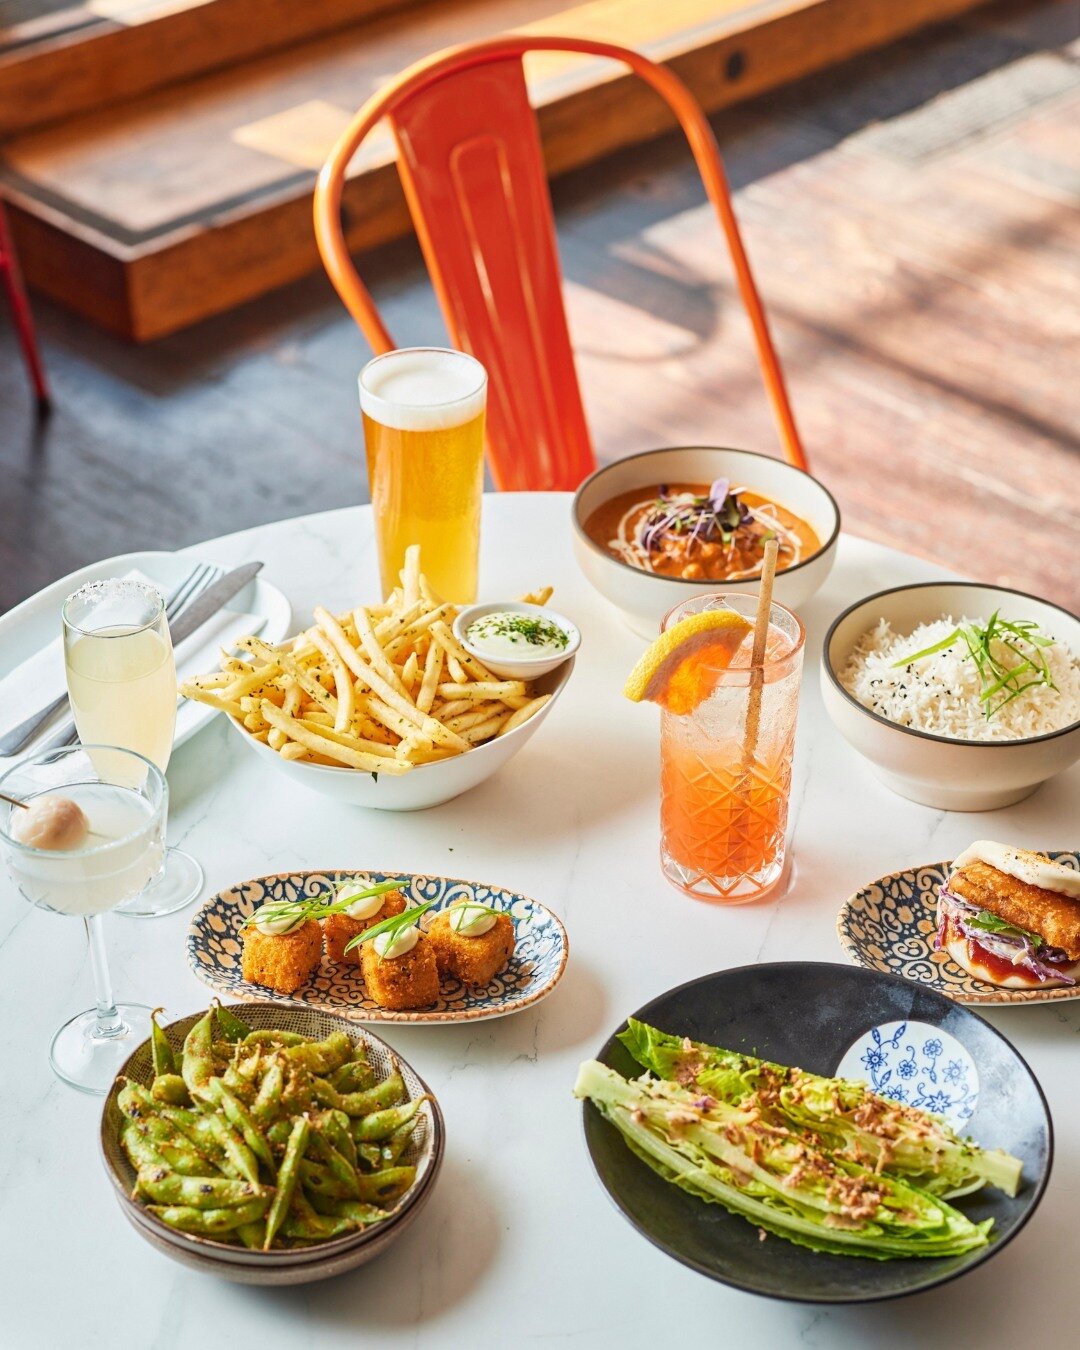 Life's too short for average food, spice it up with a dash of extraordinary at Hoo Haa Bar. 

This table awaits, full menu via the link in bio 🤤

#HooHaaBar #MelbourneFoodie #ChapelSt #MelbourneCourtyard